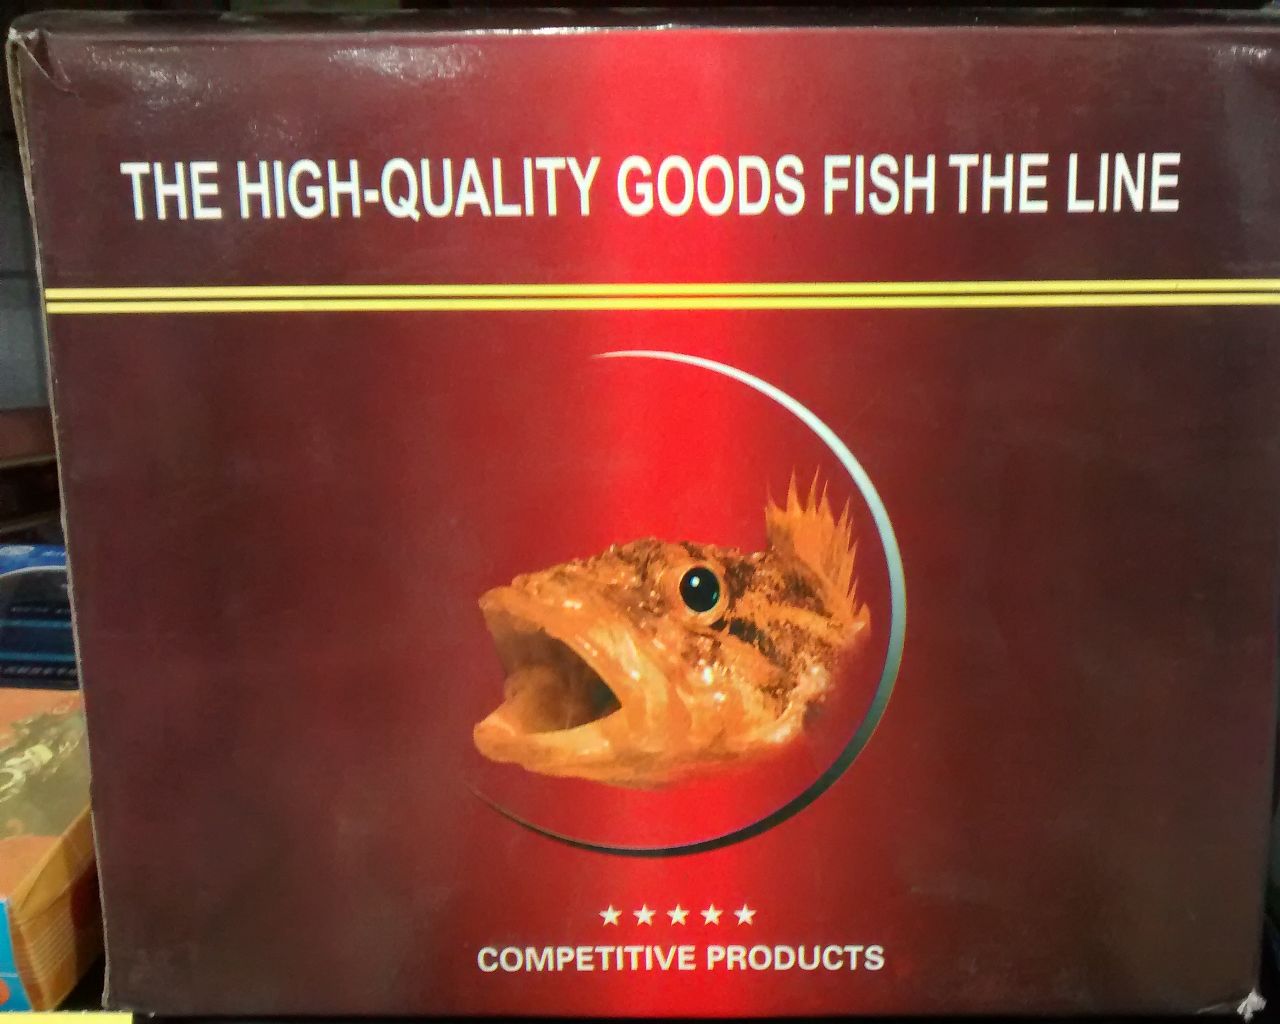 The High-Quality Goods Fish the Line. Competitive Products